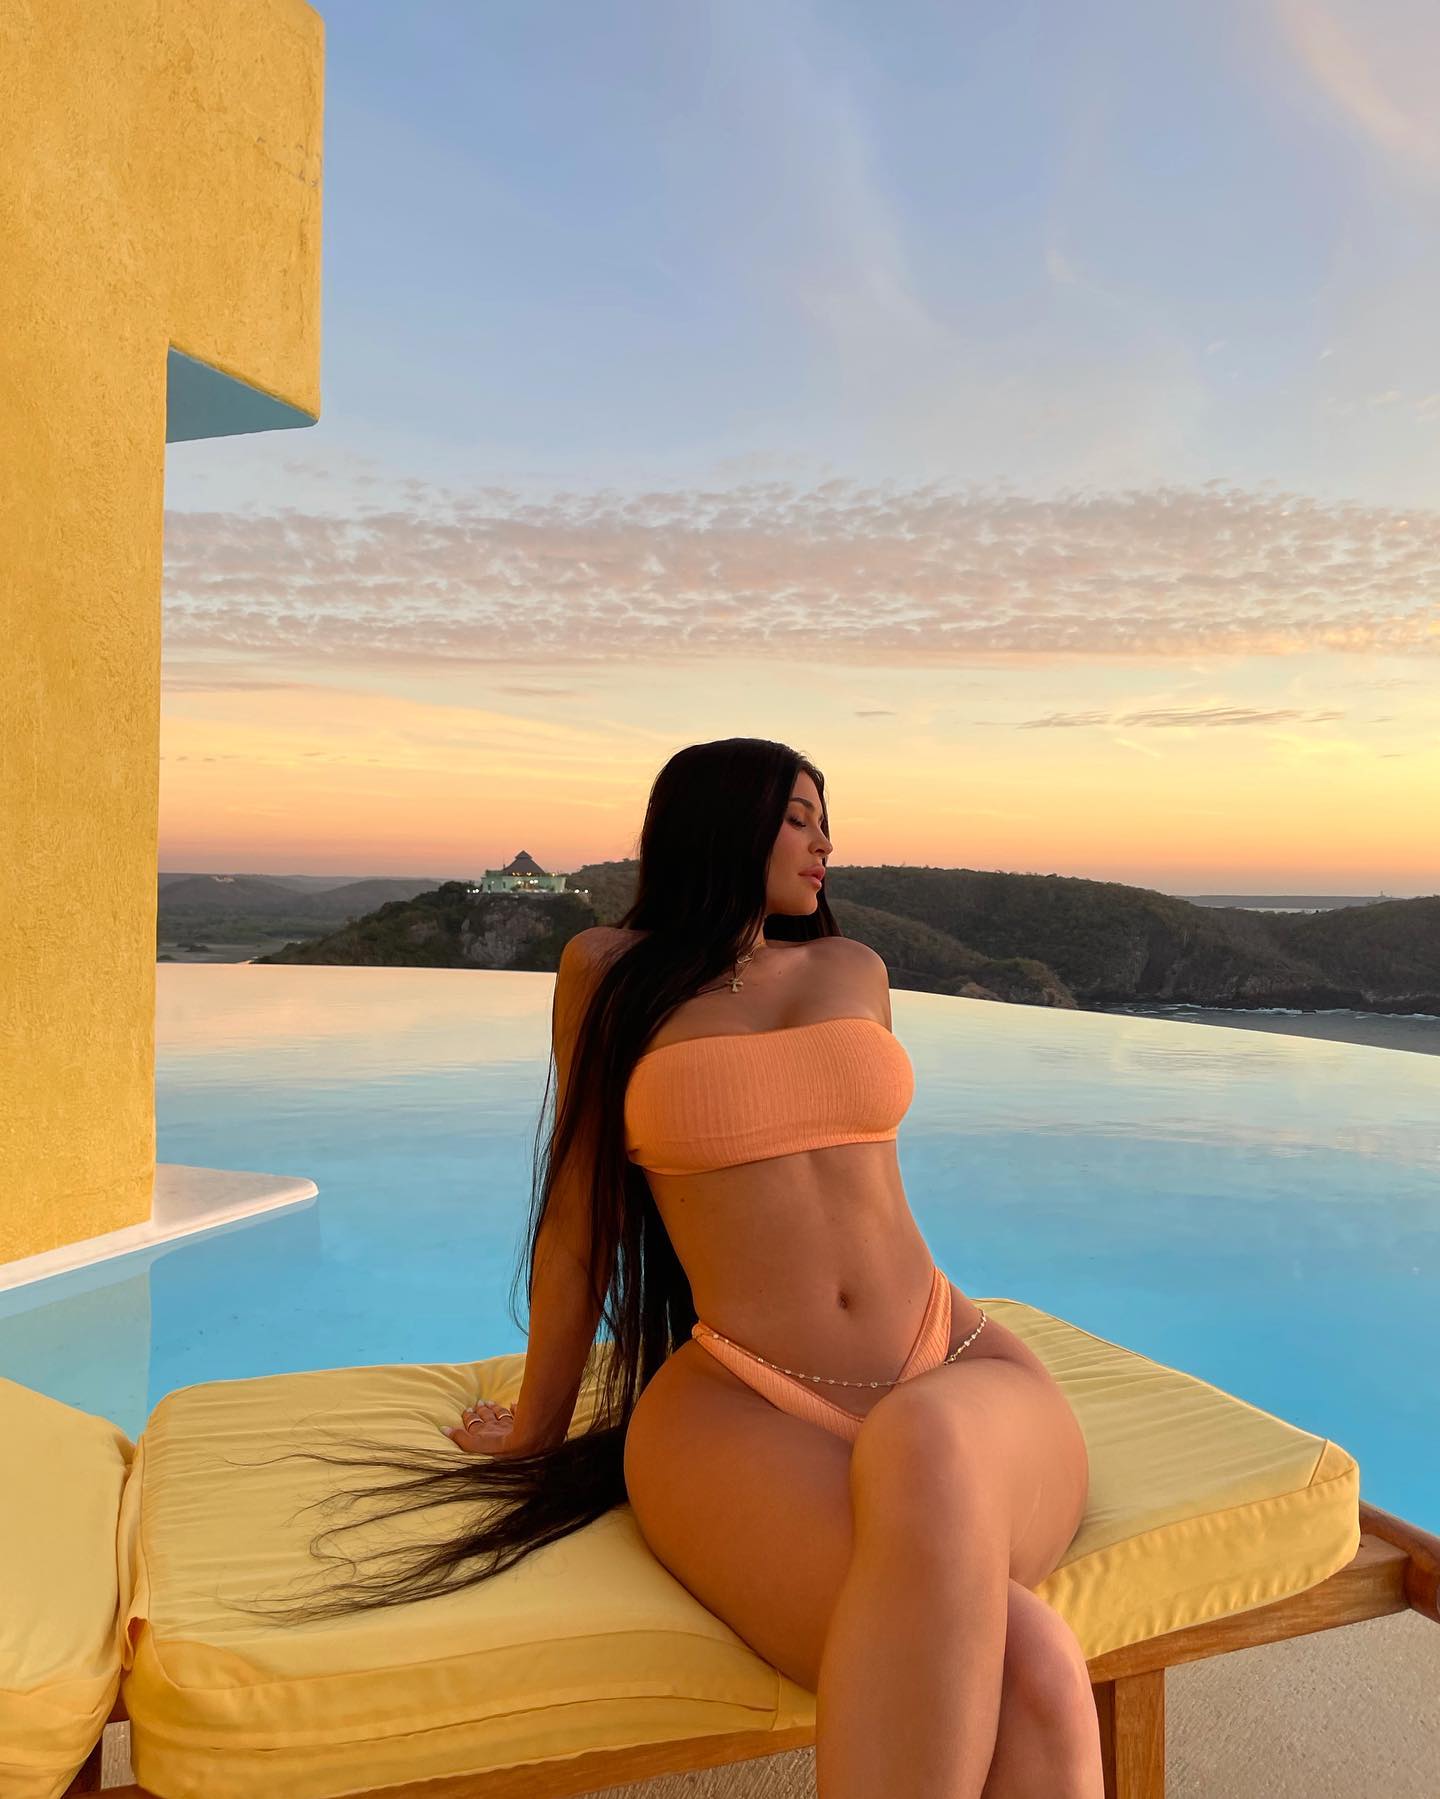 Photos n°5 : Kylie Jenner’s Shadow is Breaking the Internet!